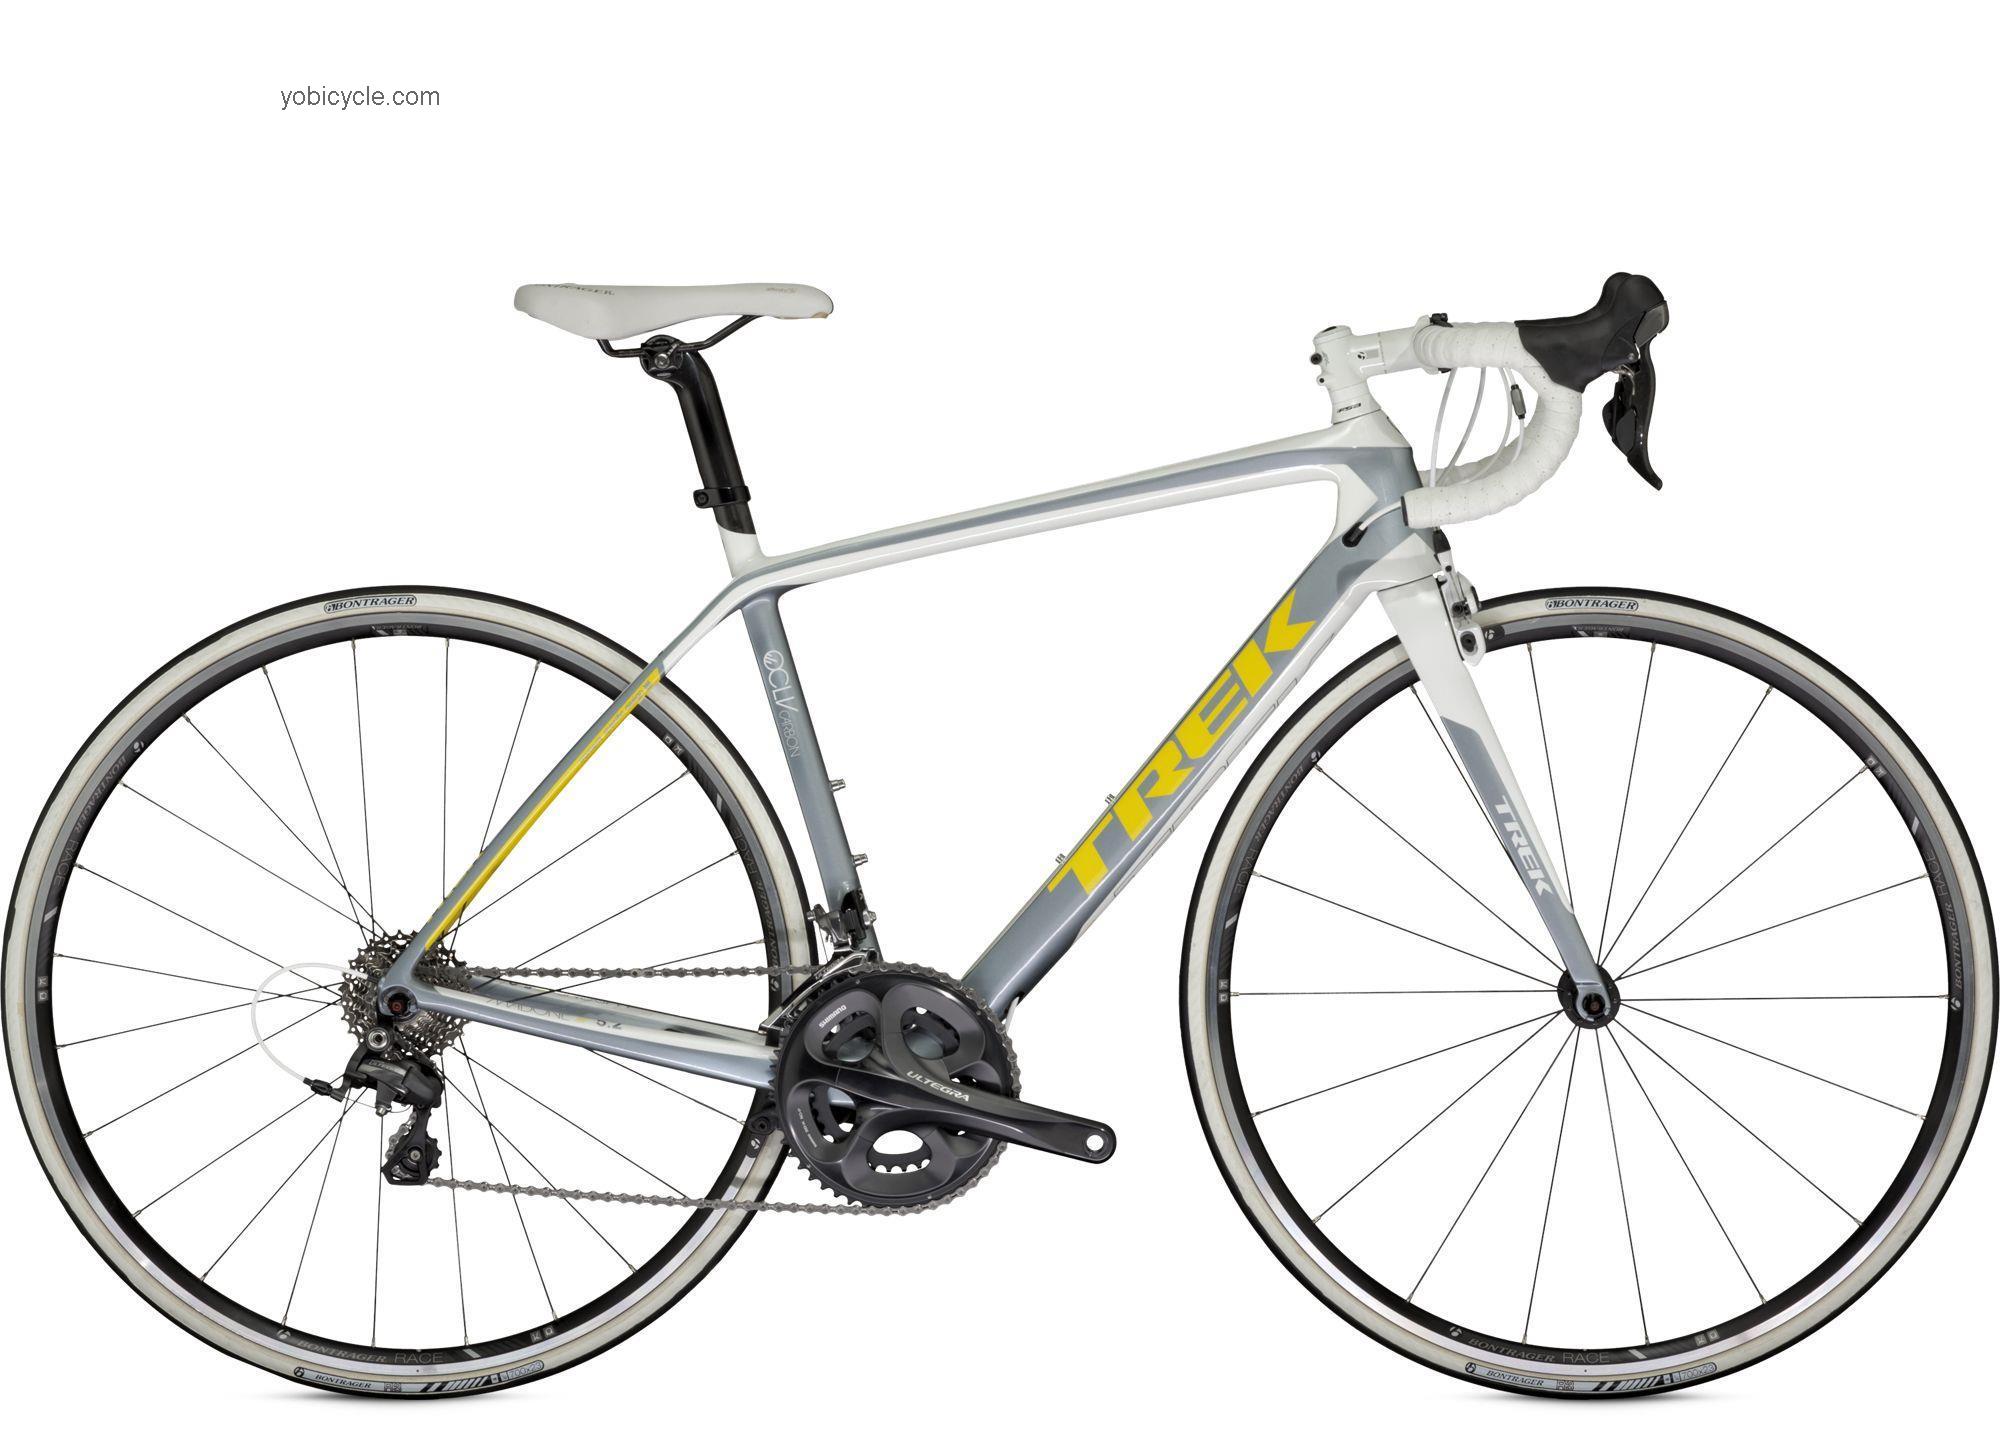 Trek Madone 5.2 WSD 2013 comparison online with competitors